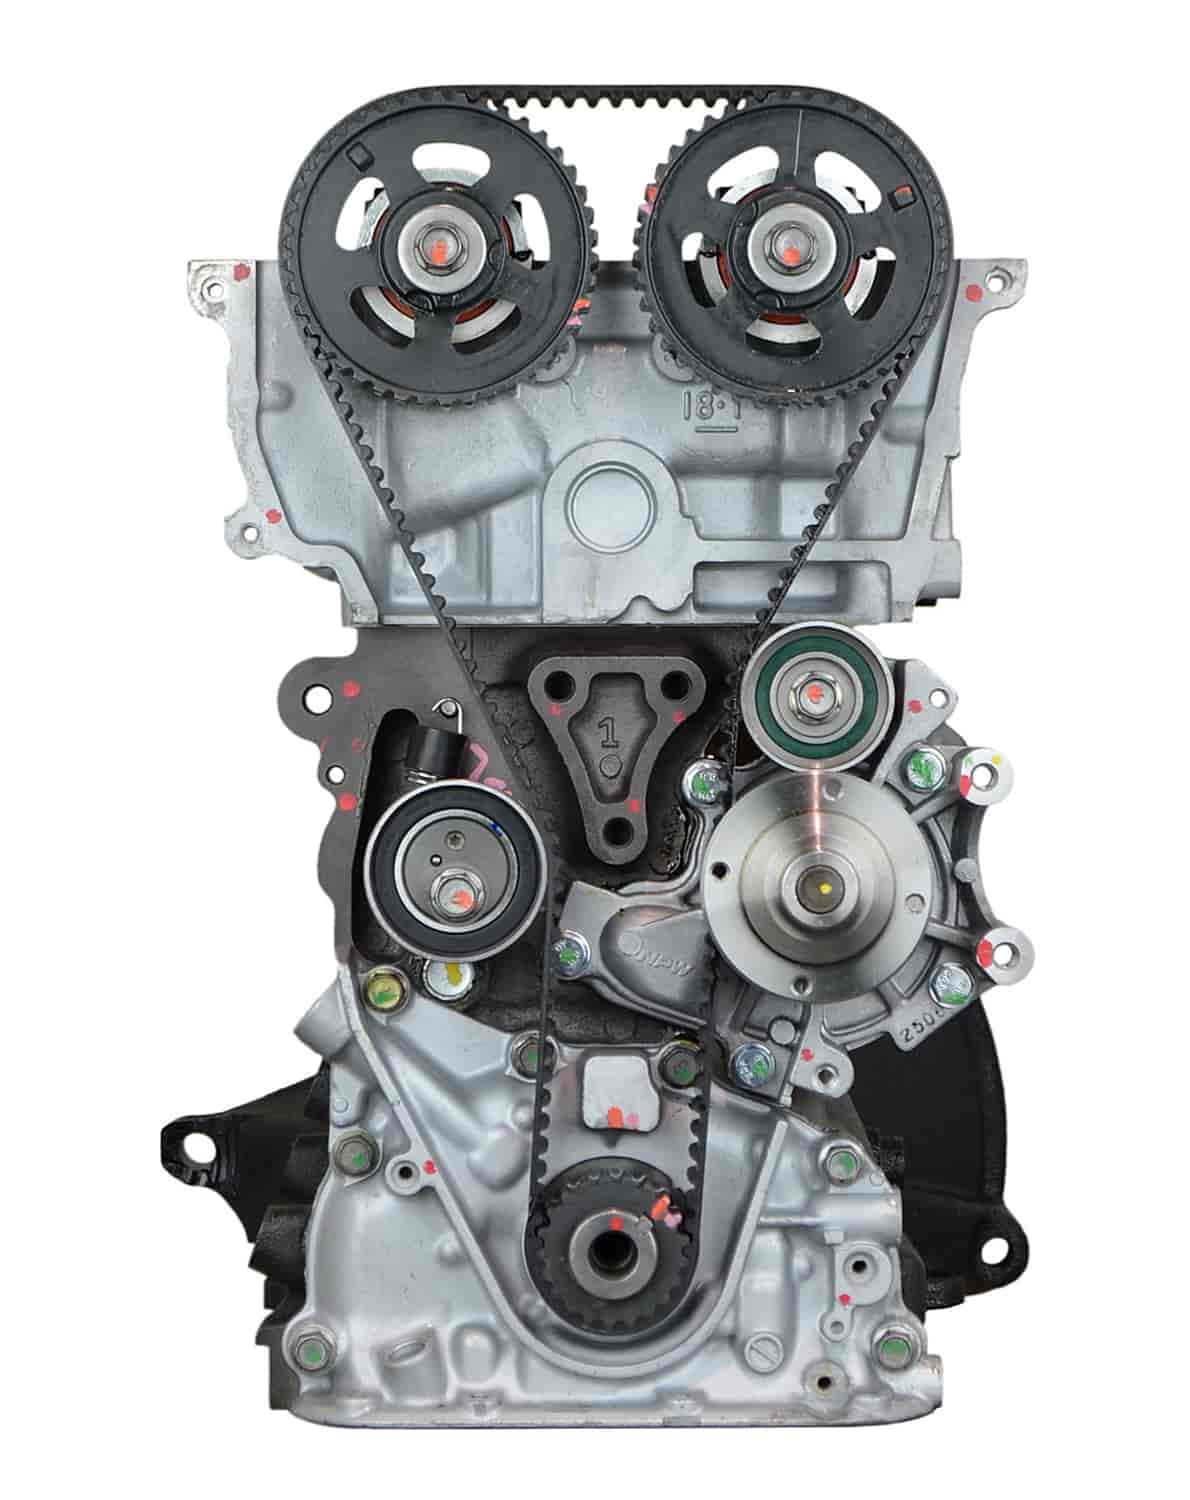 Remanufactured Crate Engine for 2000-2002 Mazda 626 with 2.0L L4